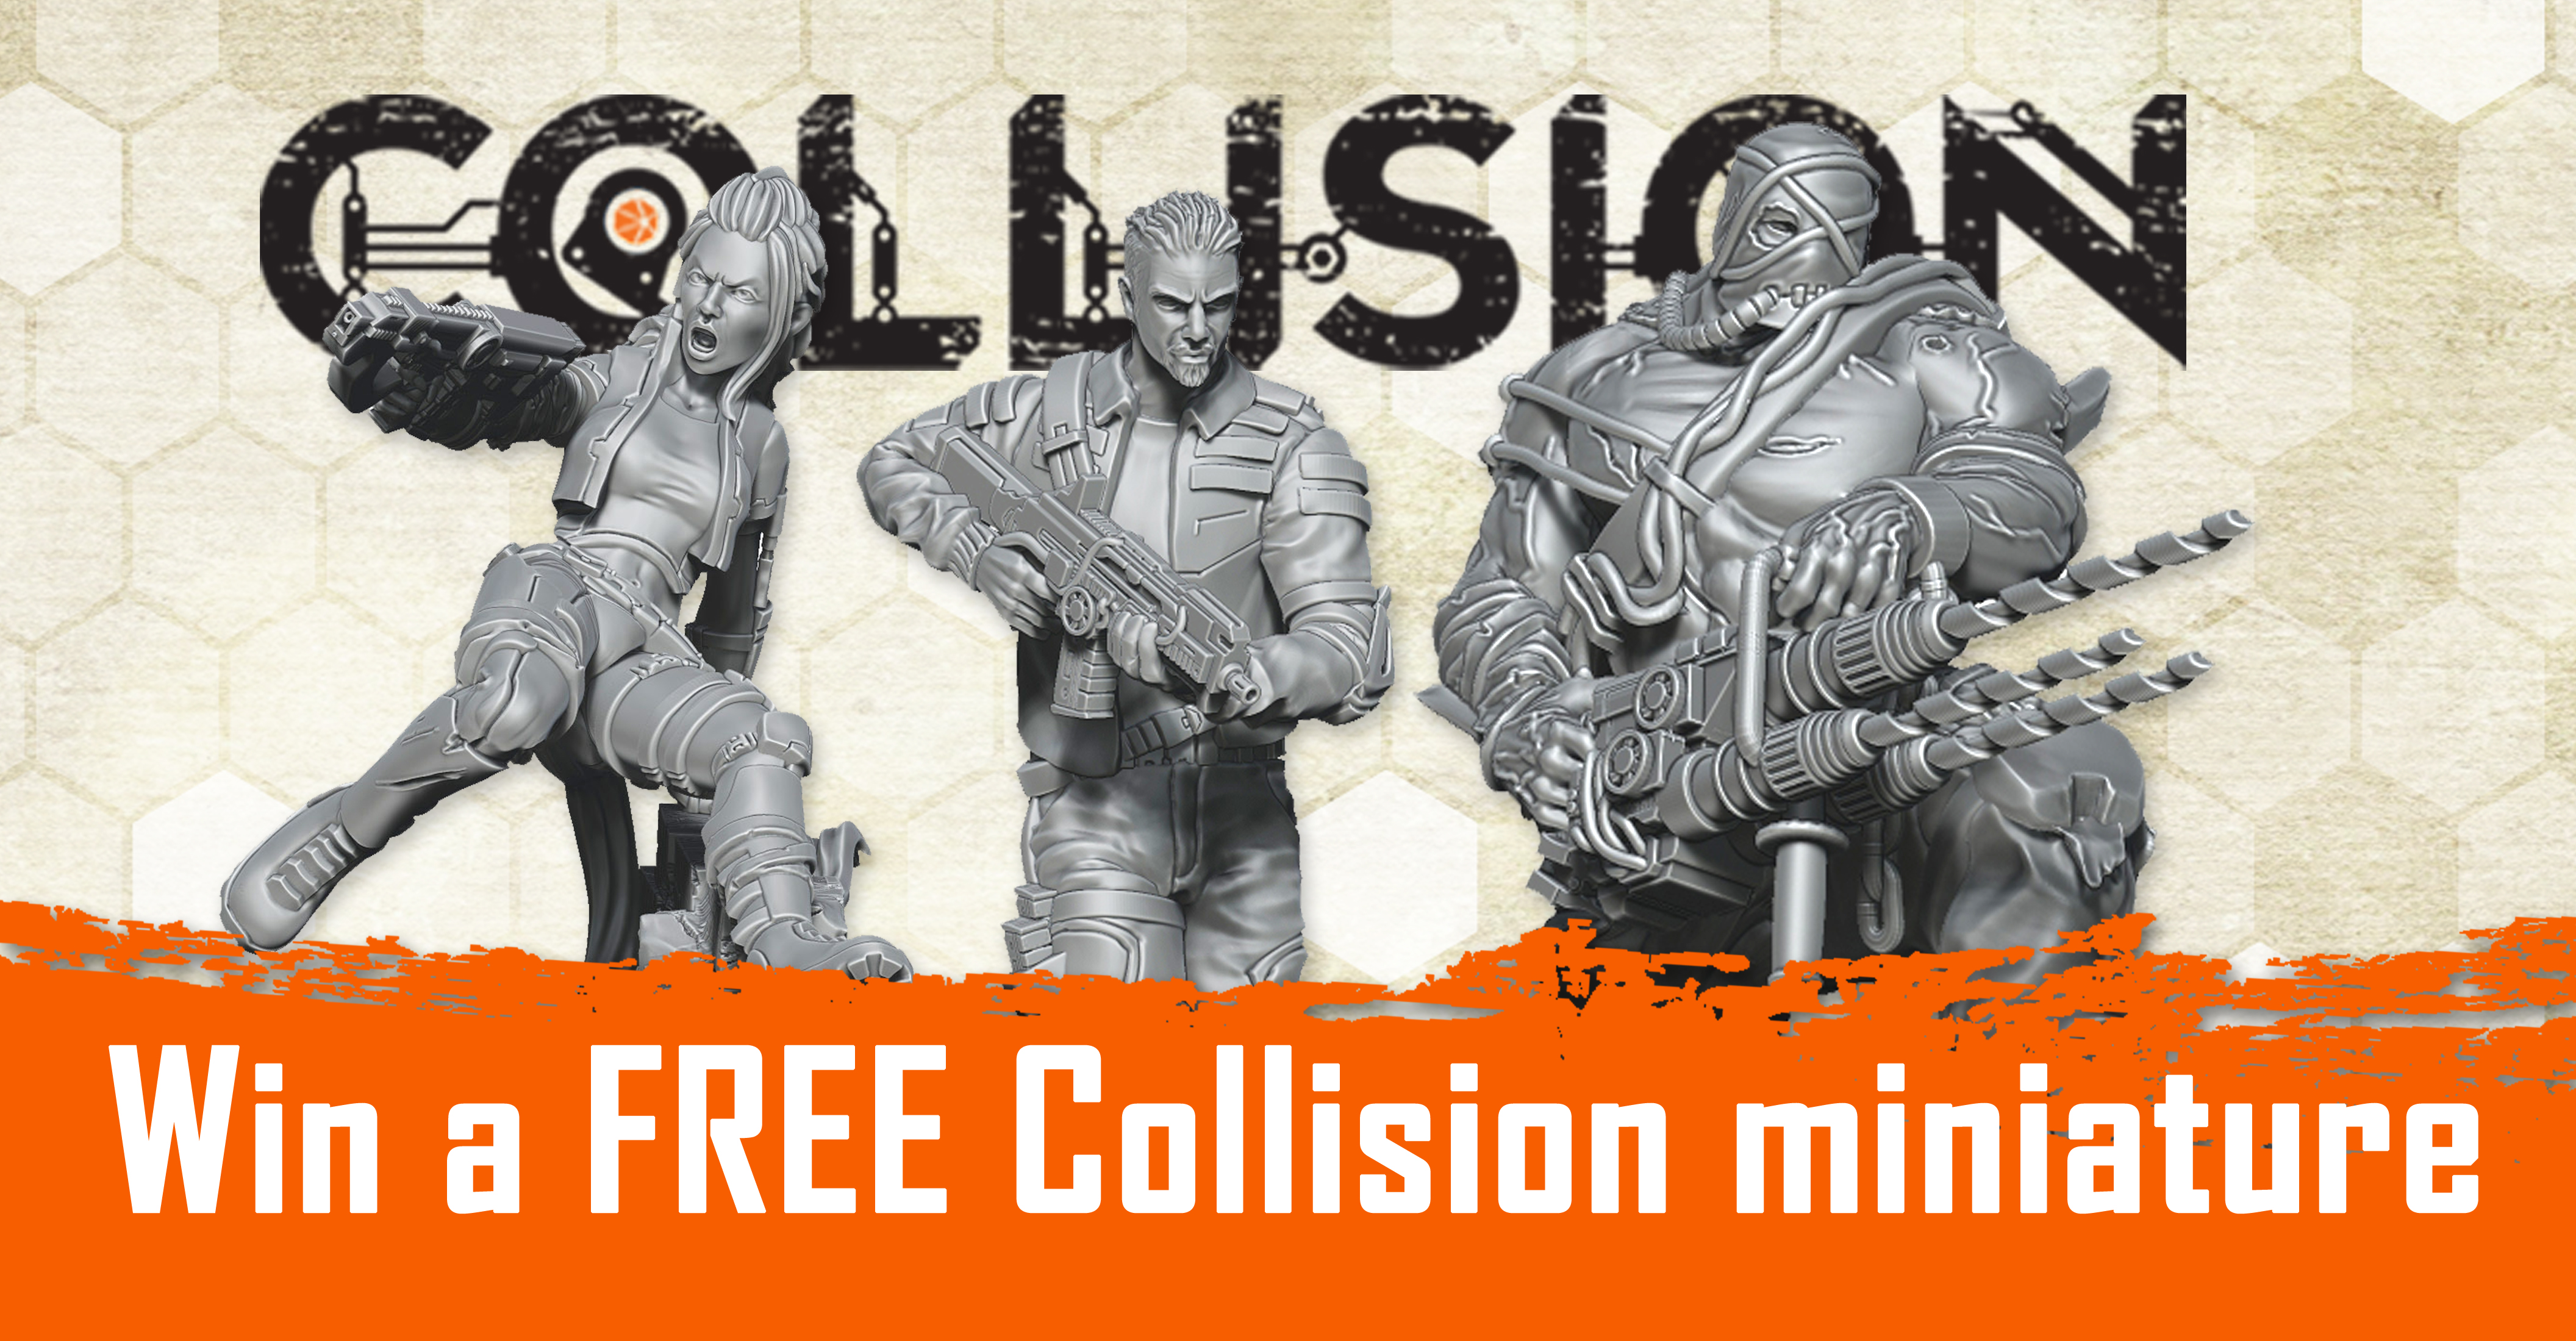 Our BackerKit page is now live! This is your last chance to back Collision and get hold of those awesome Kickstarter campaign exclusives.